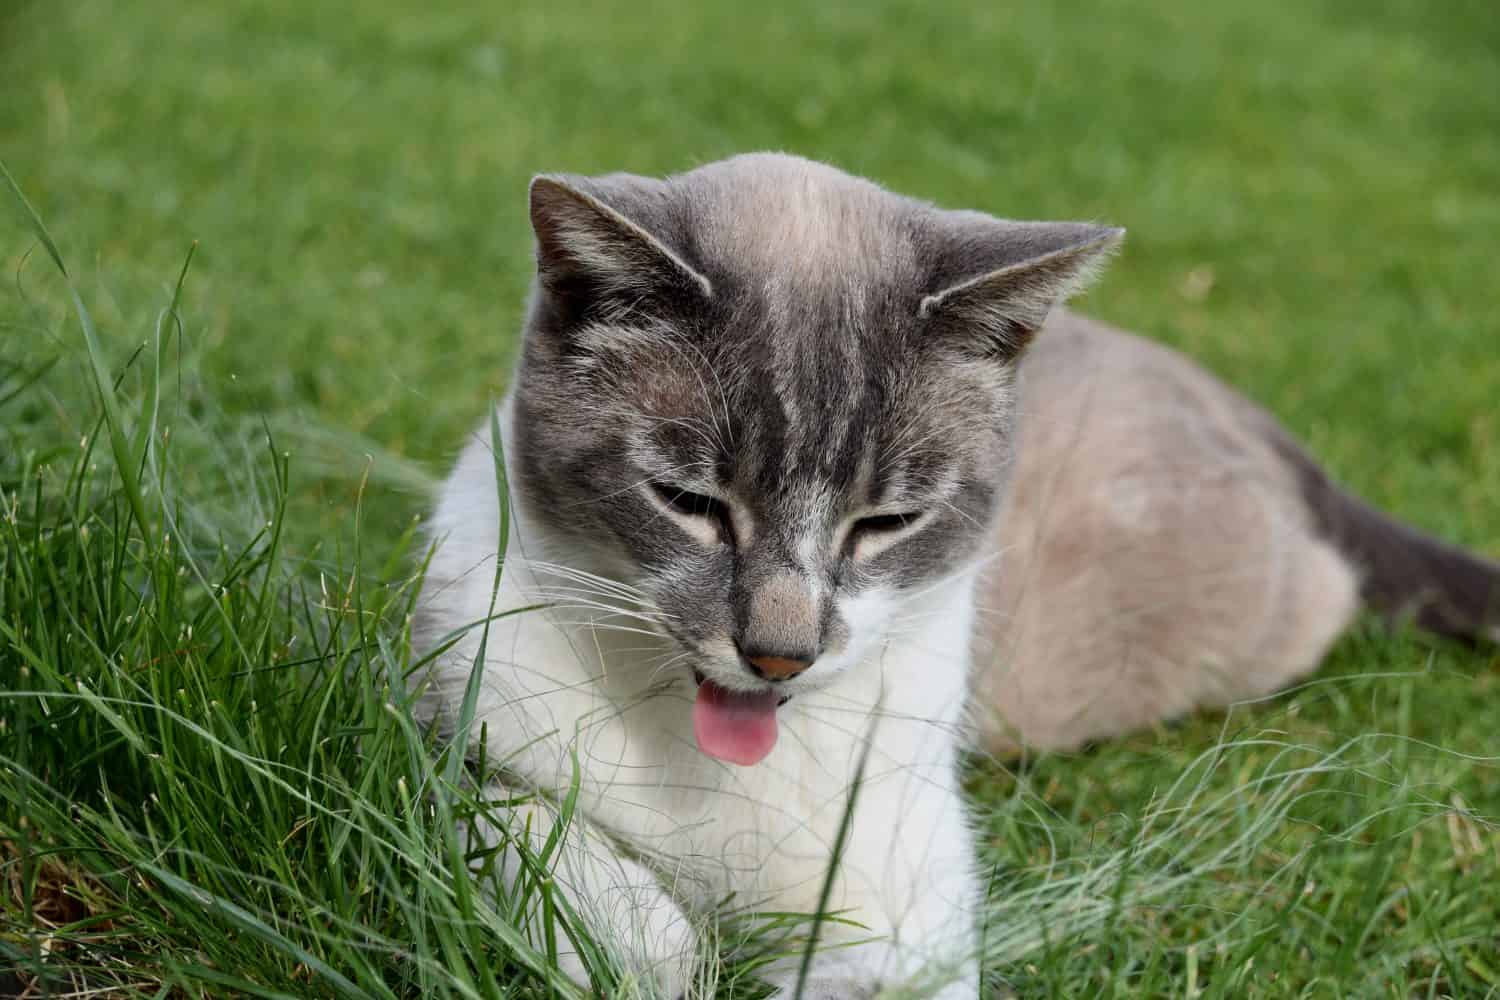 Funny cat sticking out his tongue